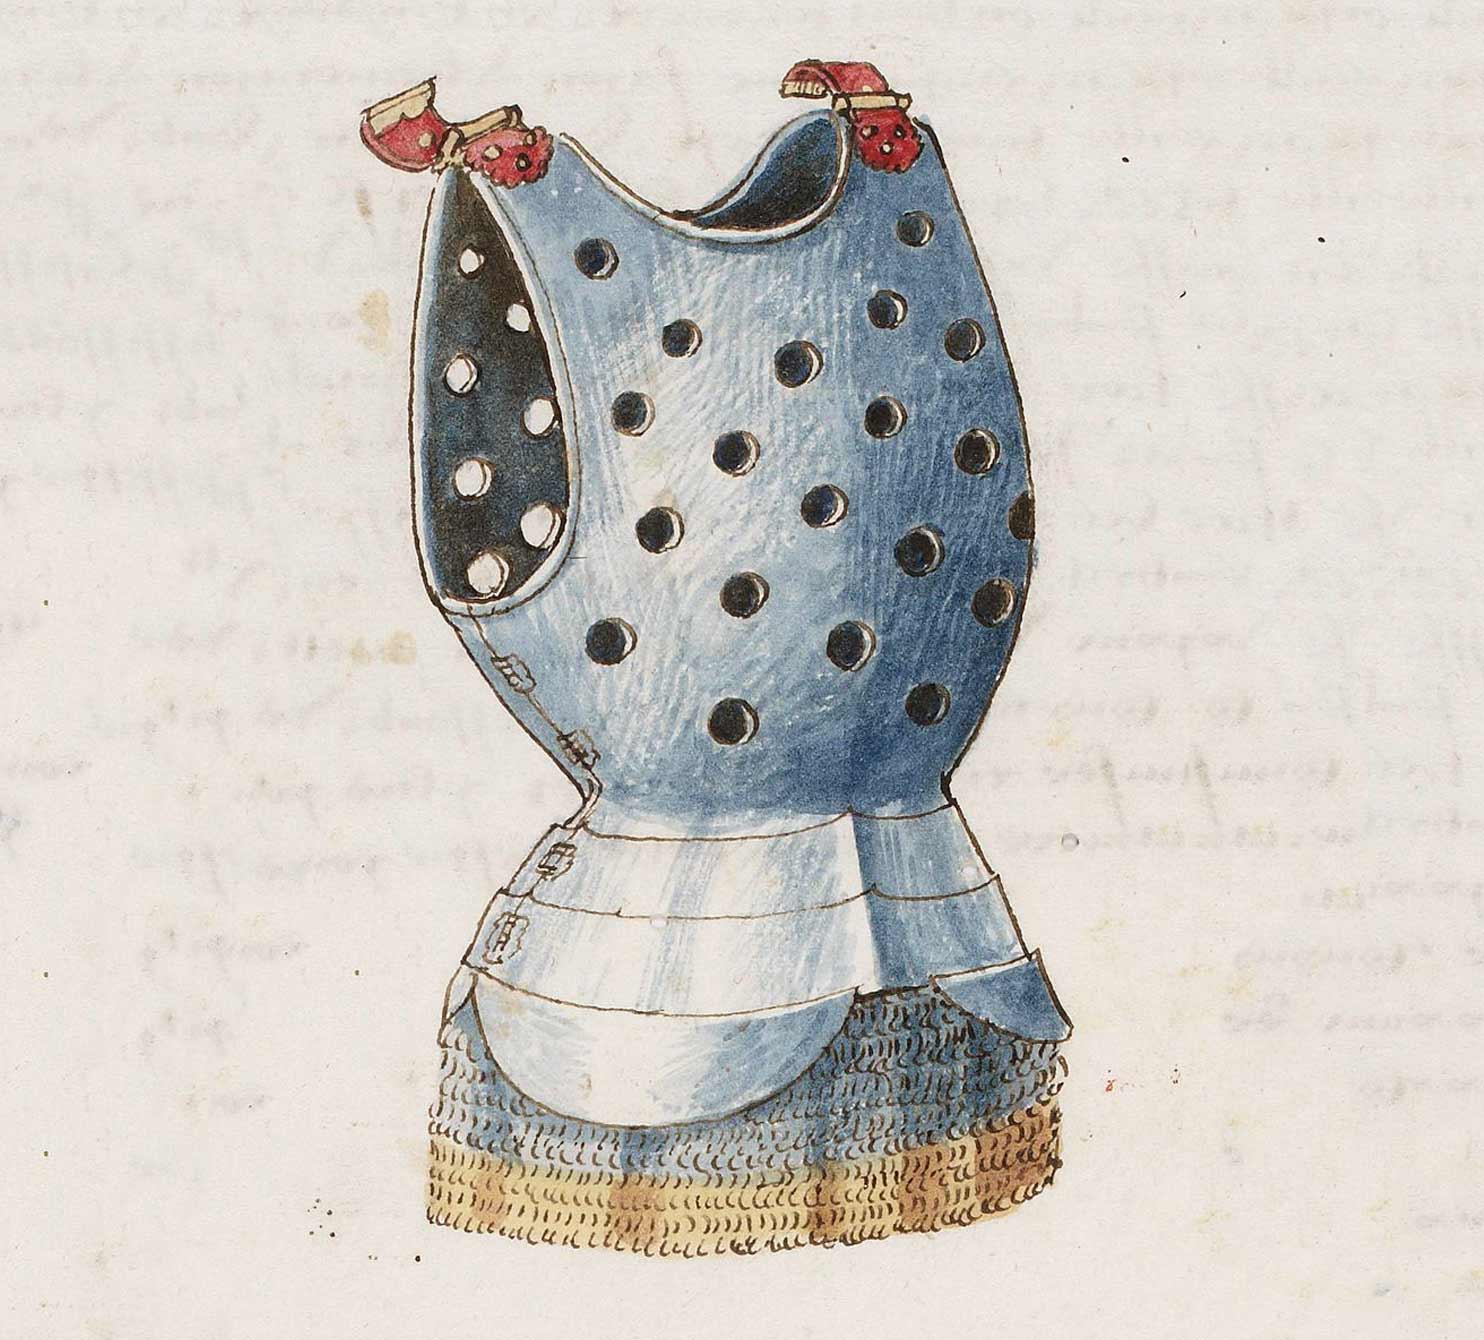 15th century medieval cuirass used in special tournaments and festivals, perforated for its lighter weight and ventilation.